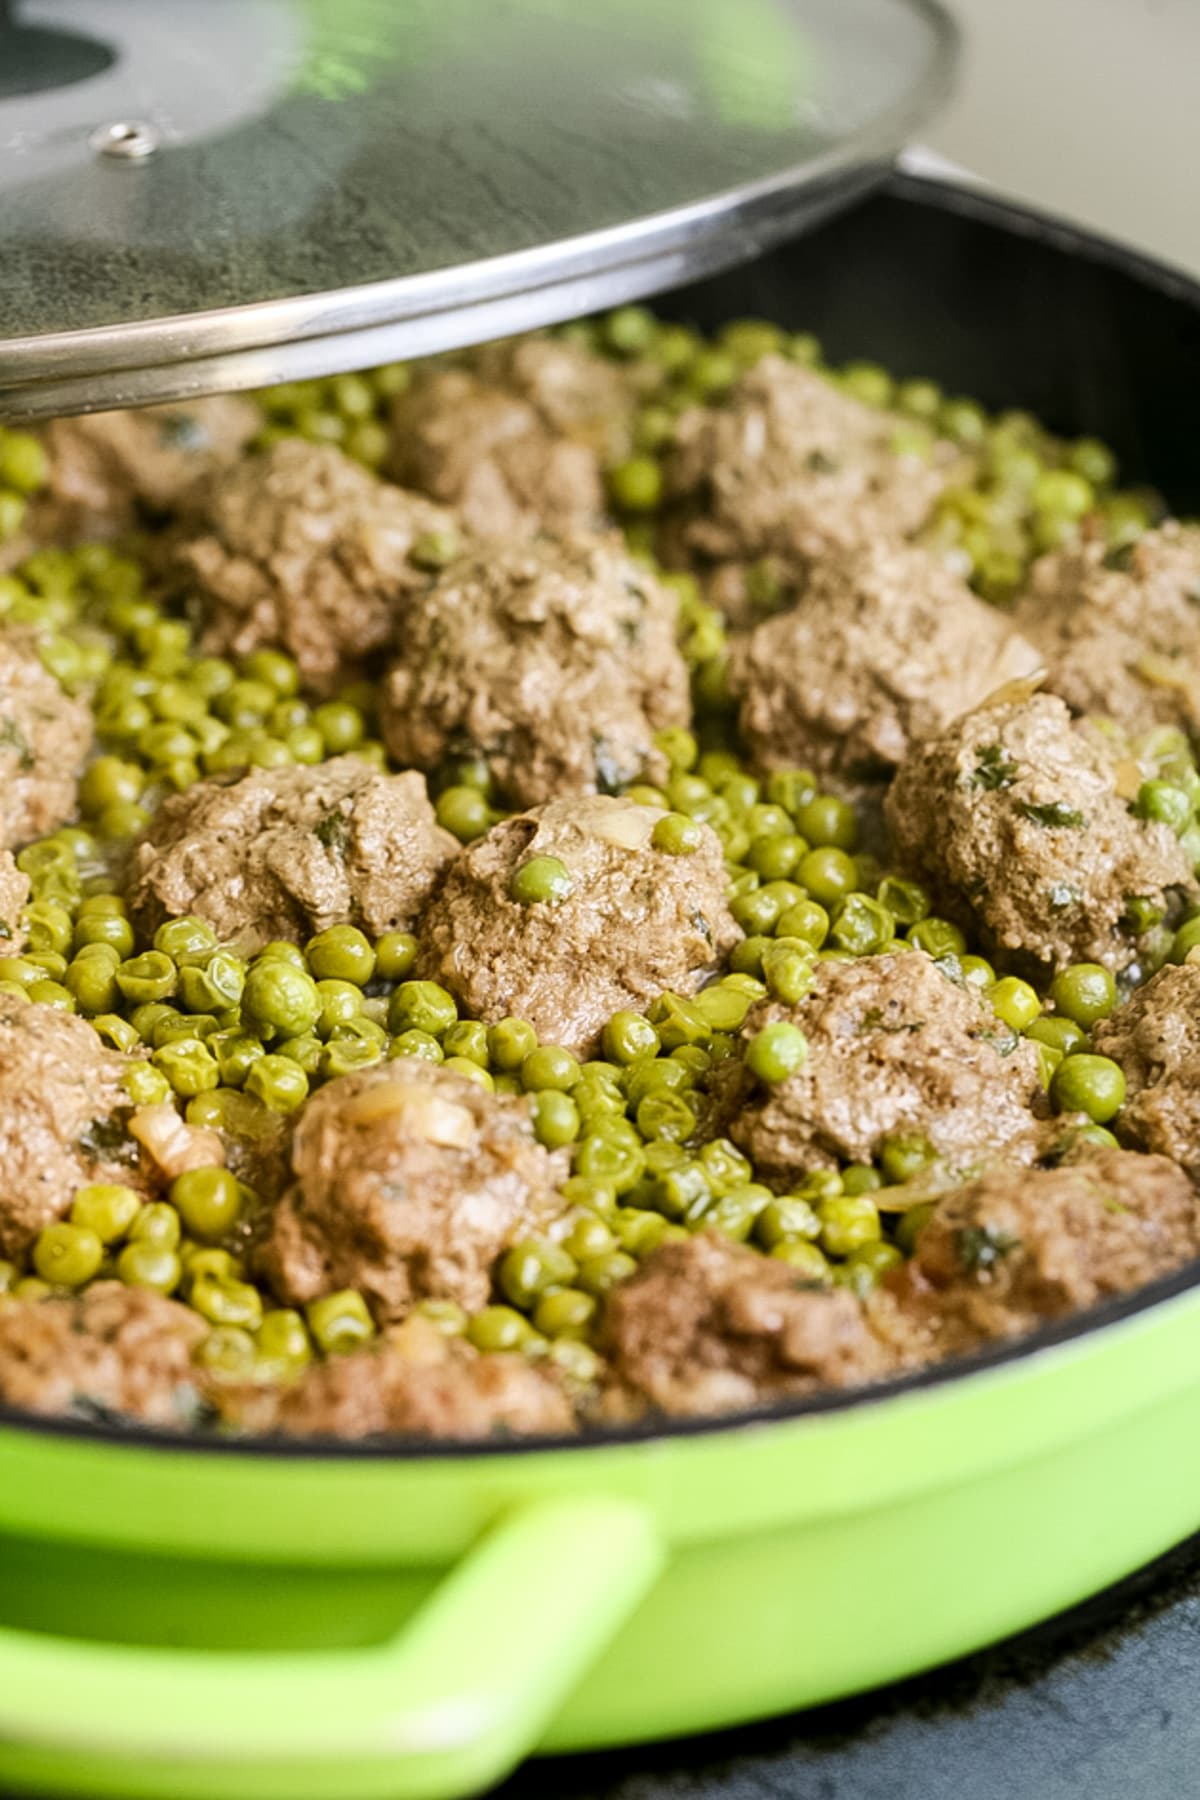 israeli meatballs are ready for serving